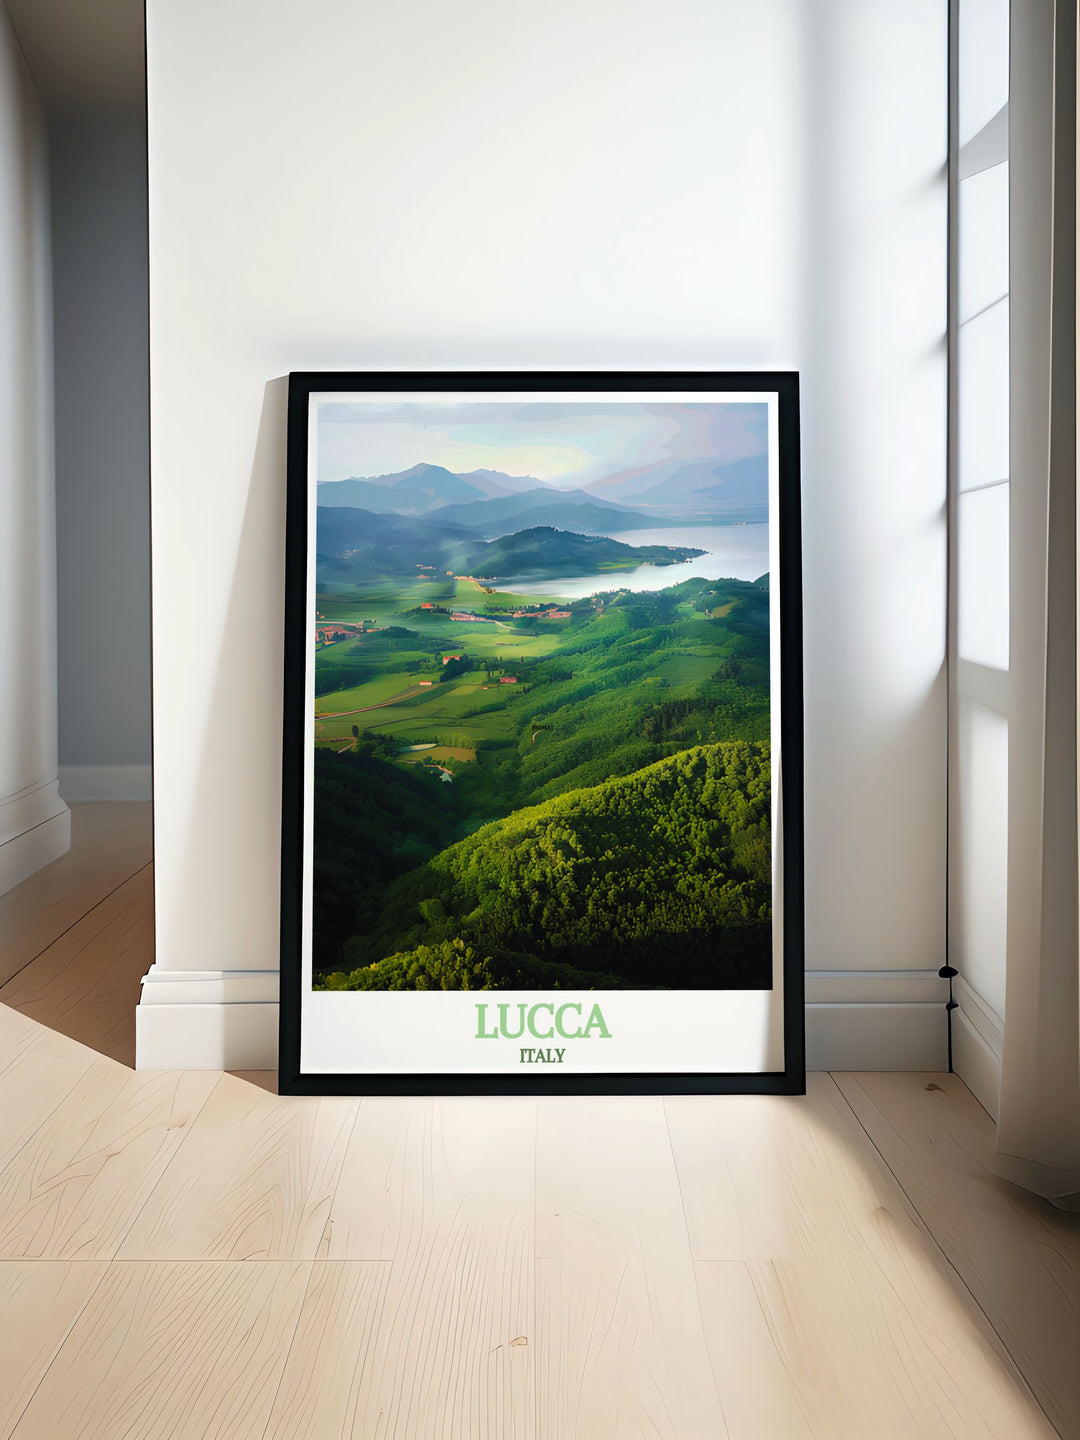 Lucca Wall Art showcasing vibrant city streets combined with the stunning views of Lago di Massaciuccoli perfect for brightening up any living room or office space with elegant decor and modern art